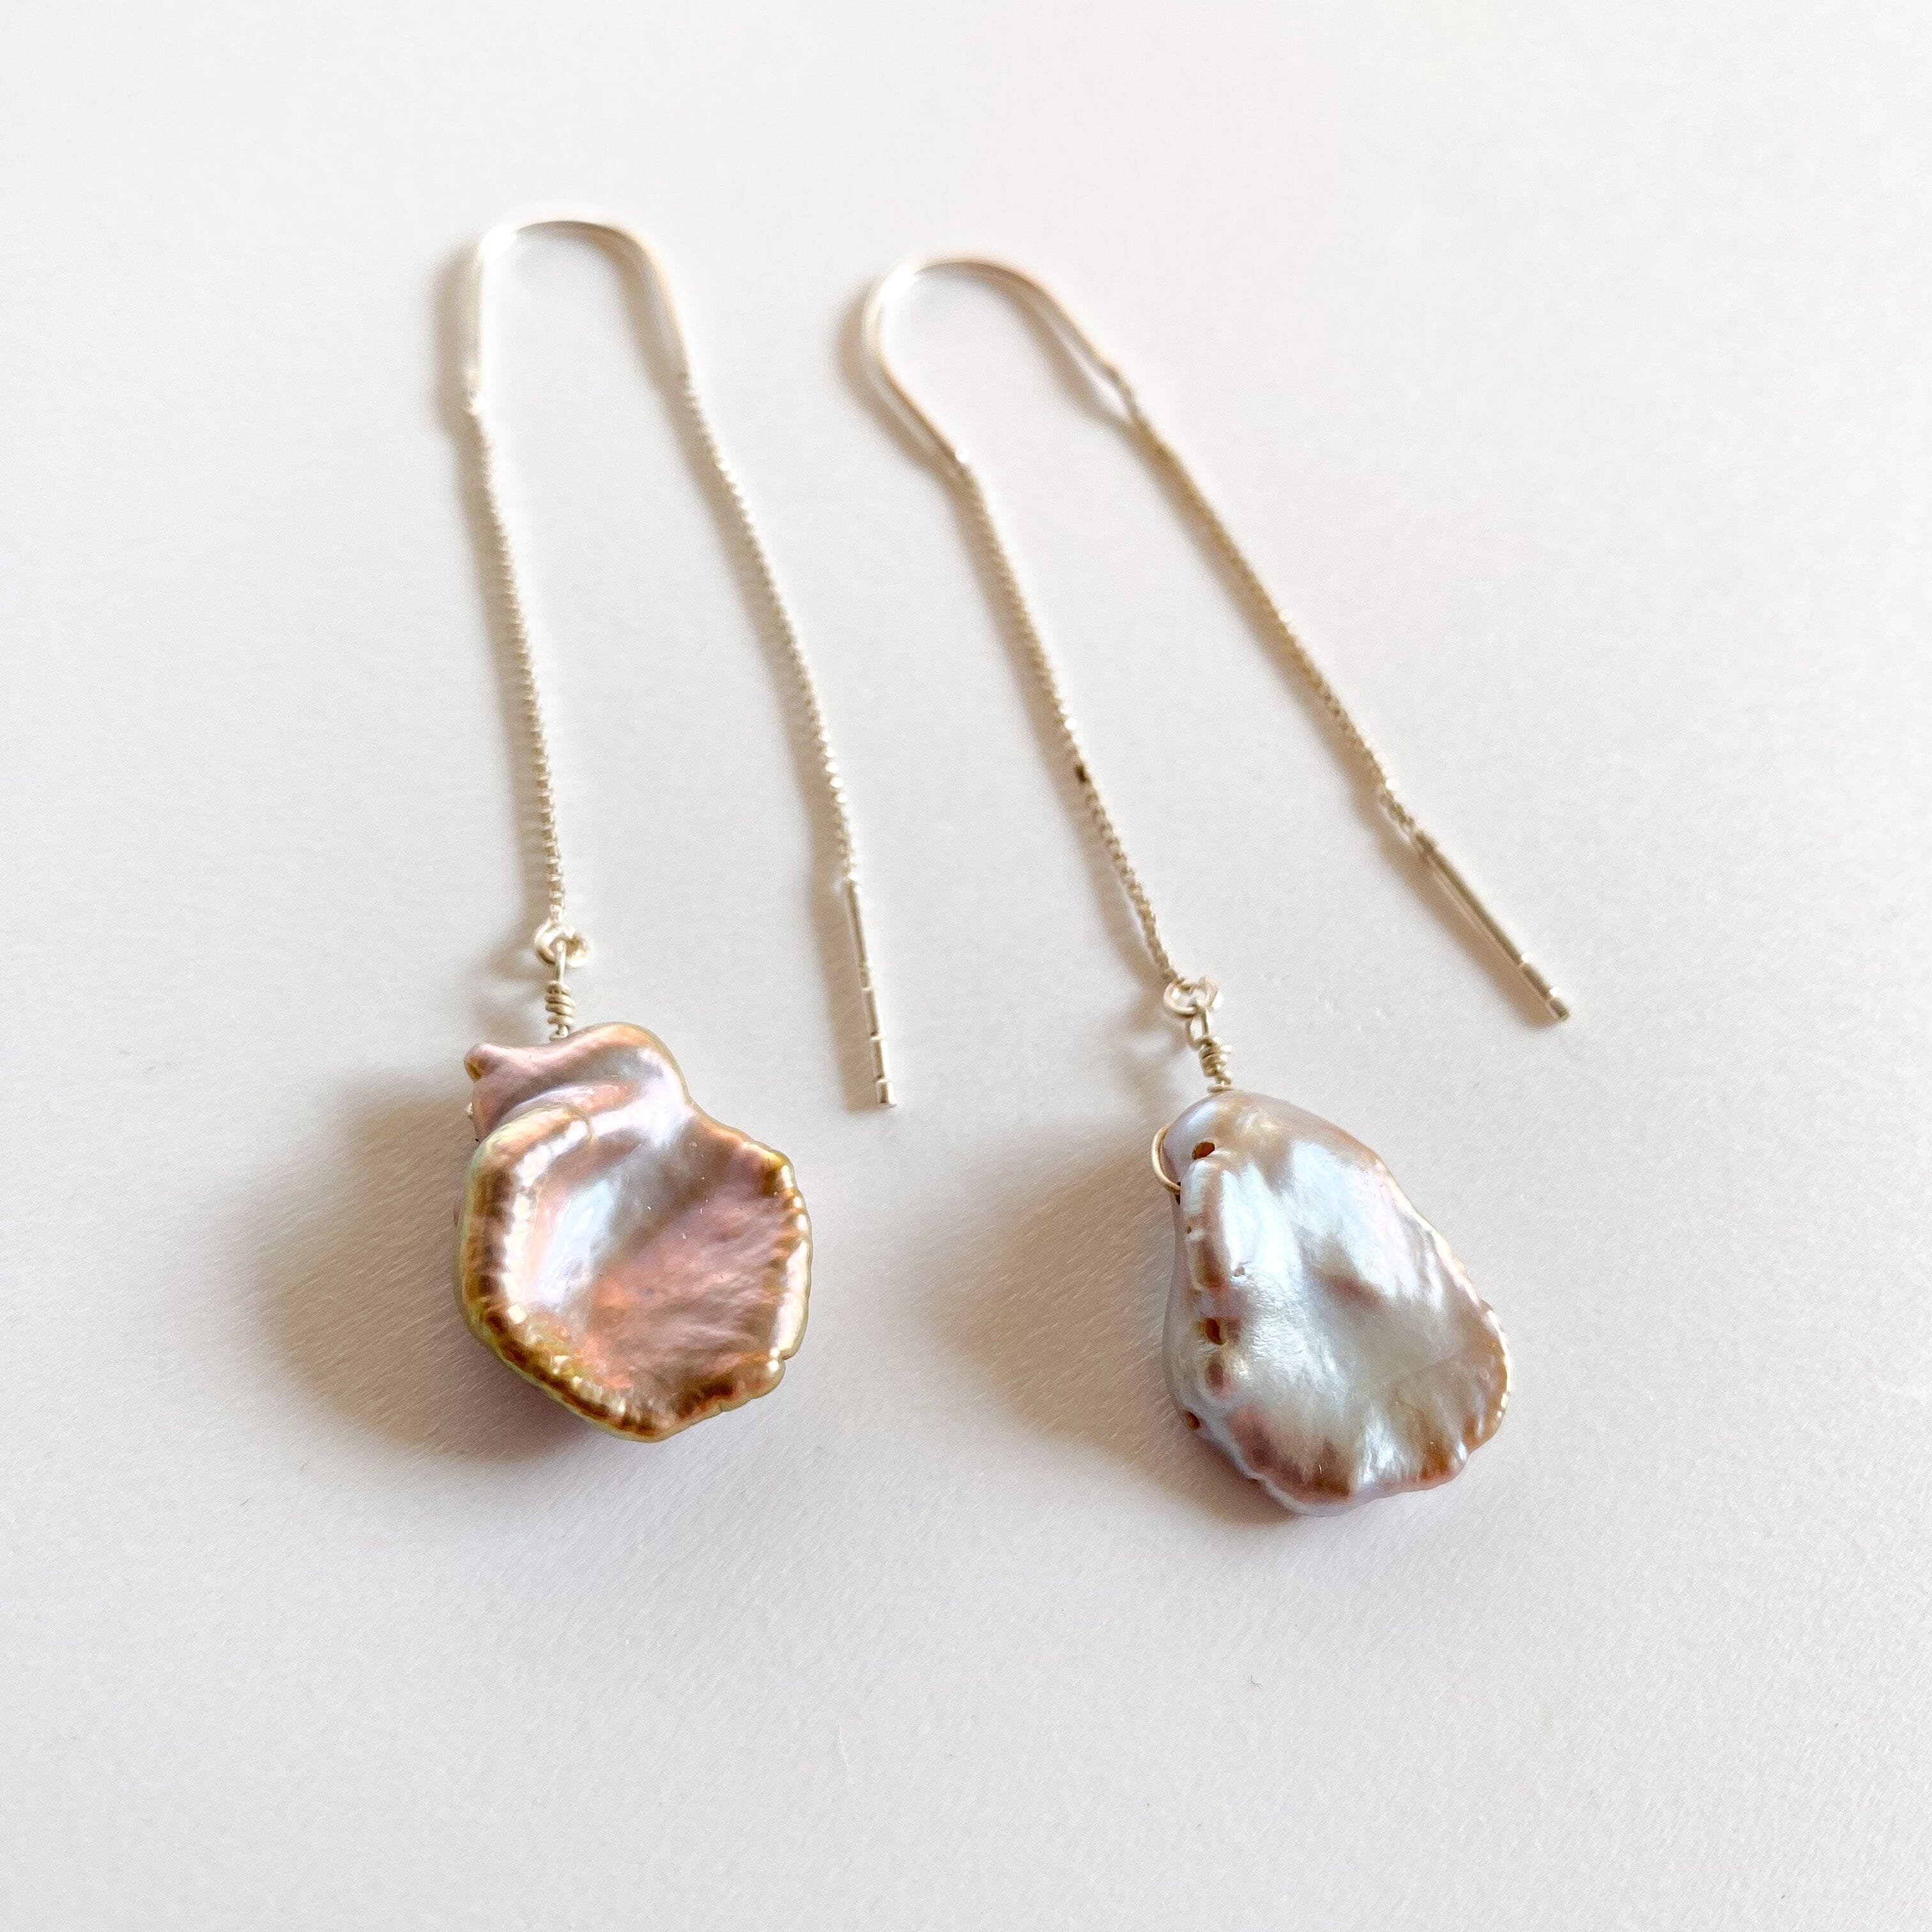 Pearl Collection - Lisa Carney Jewelry Lisa Carney Designs Pearl Thread Earring - Lilac 